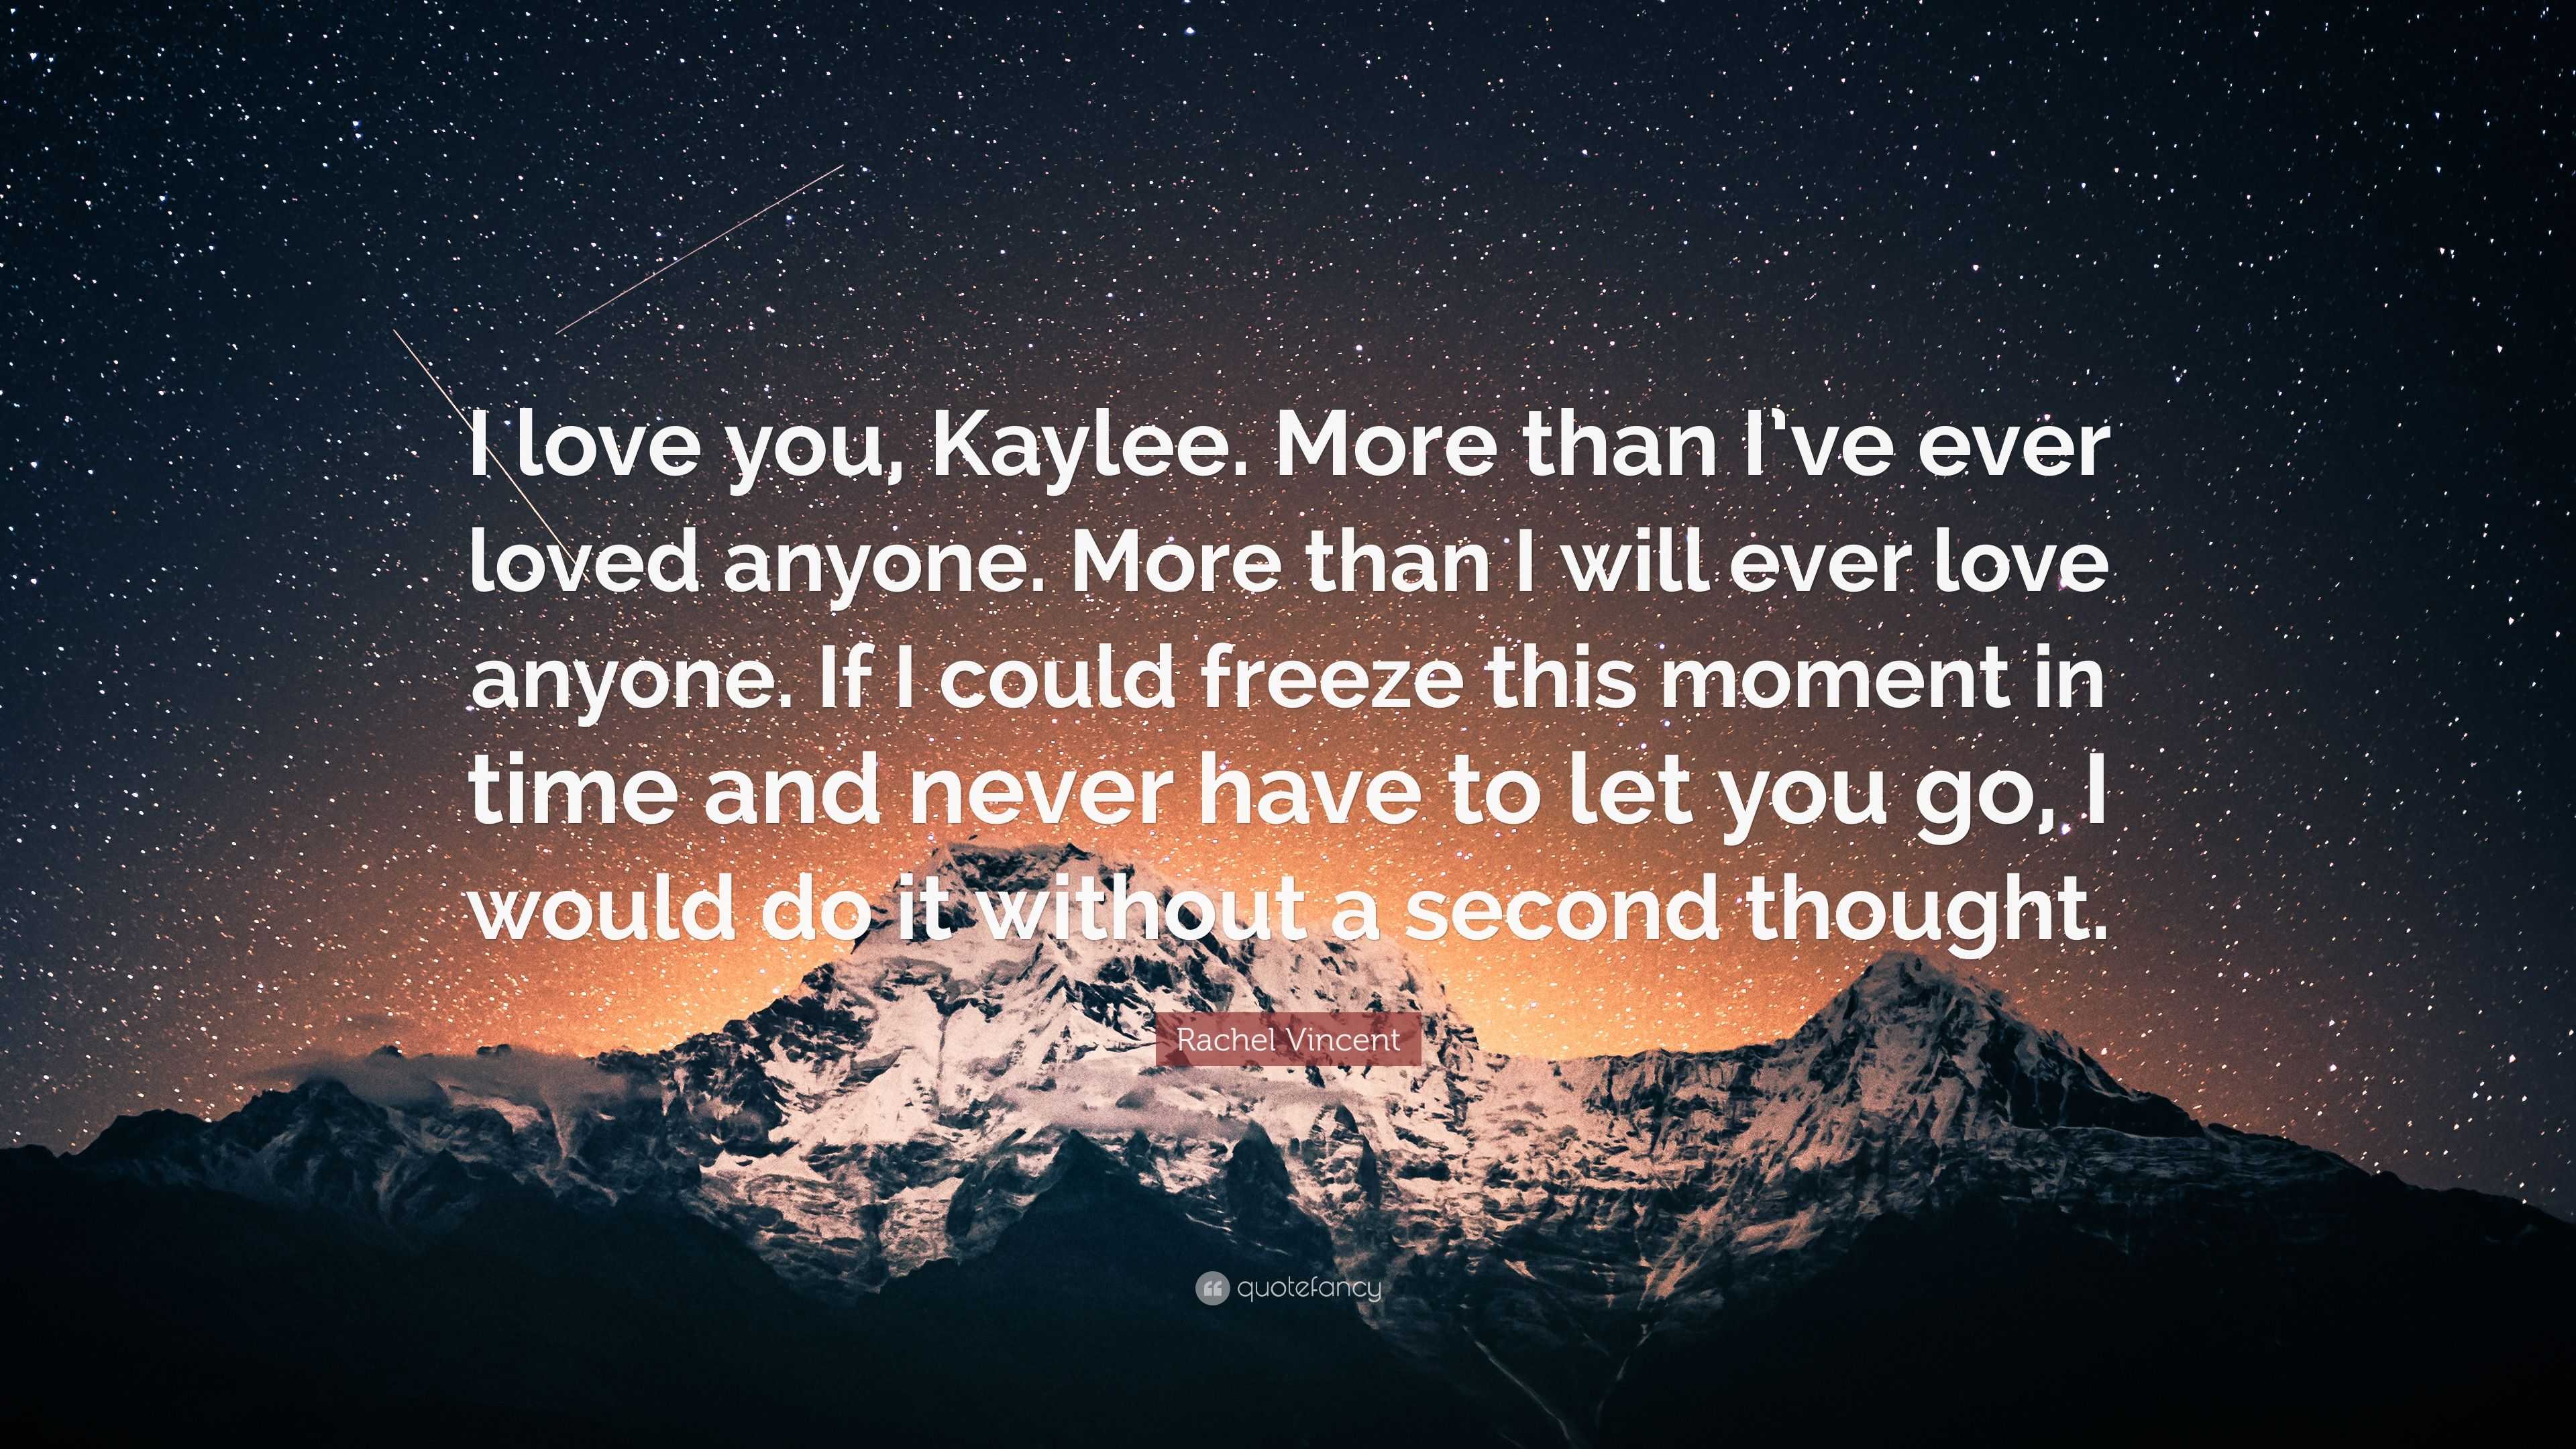 Rachel Vincent Quote I Love You Kaylee More Than I Ve Ever Loved Anyone More Than I Will Ever Love Anyone If I Could Freeze This Moment I